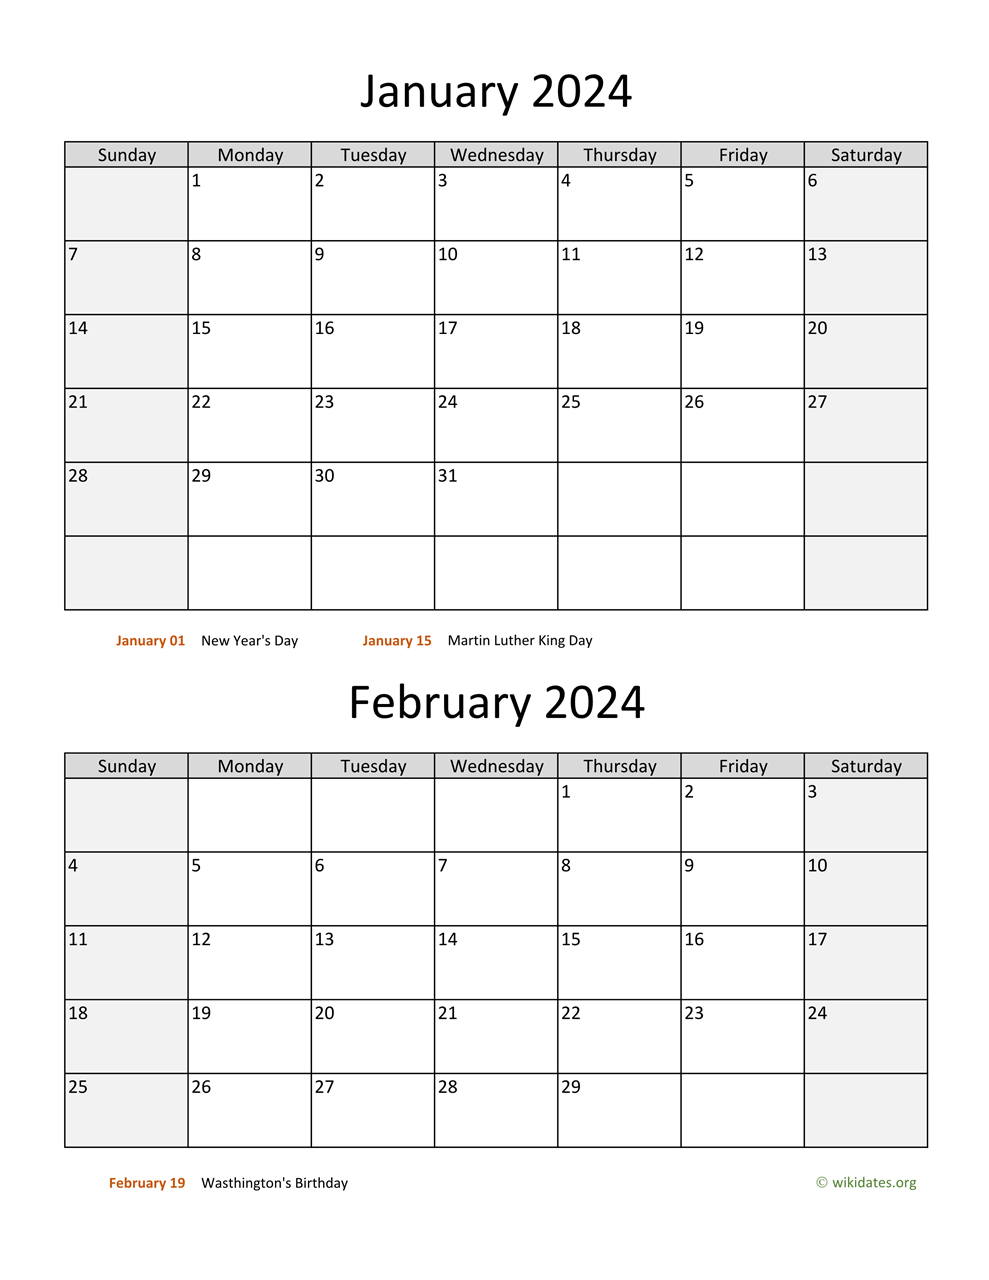 January And February 2024 Calendar | Wikidates for Printable January And February 2024 Calendar